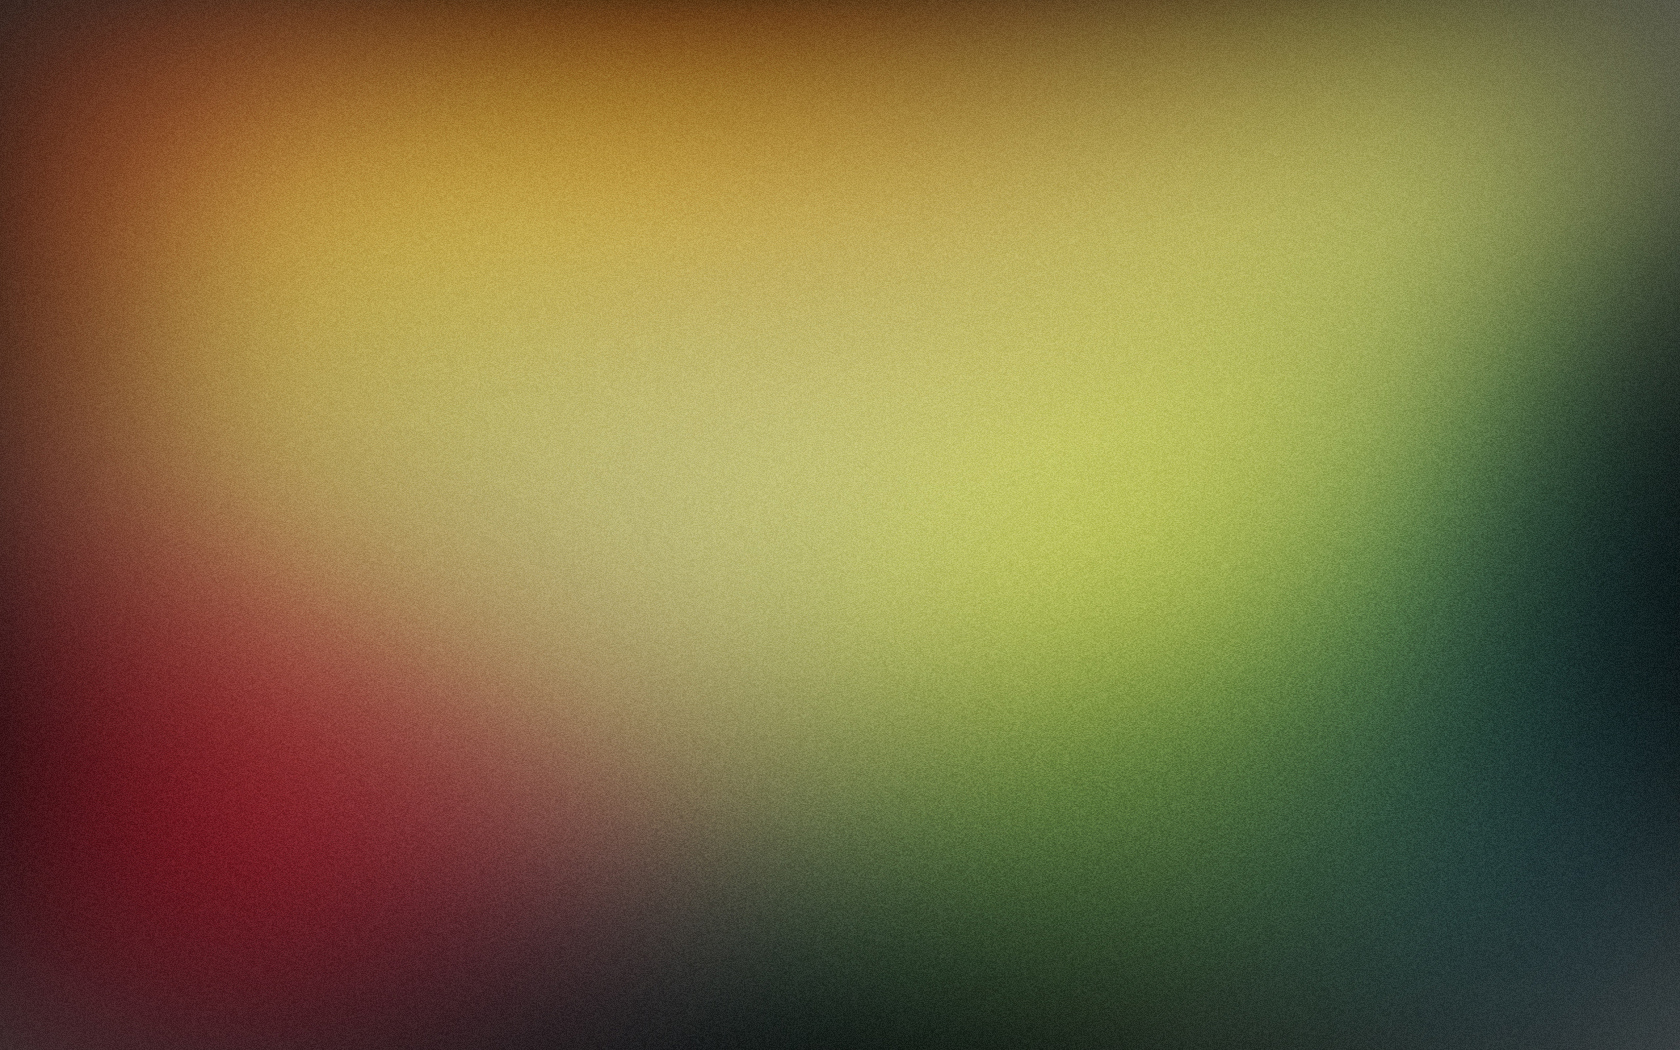 textures gaussian blur simple background simple colors 1680x1050